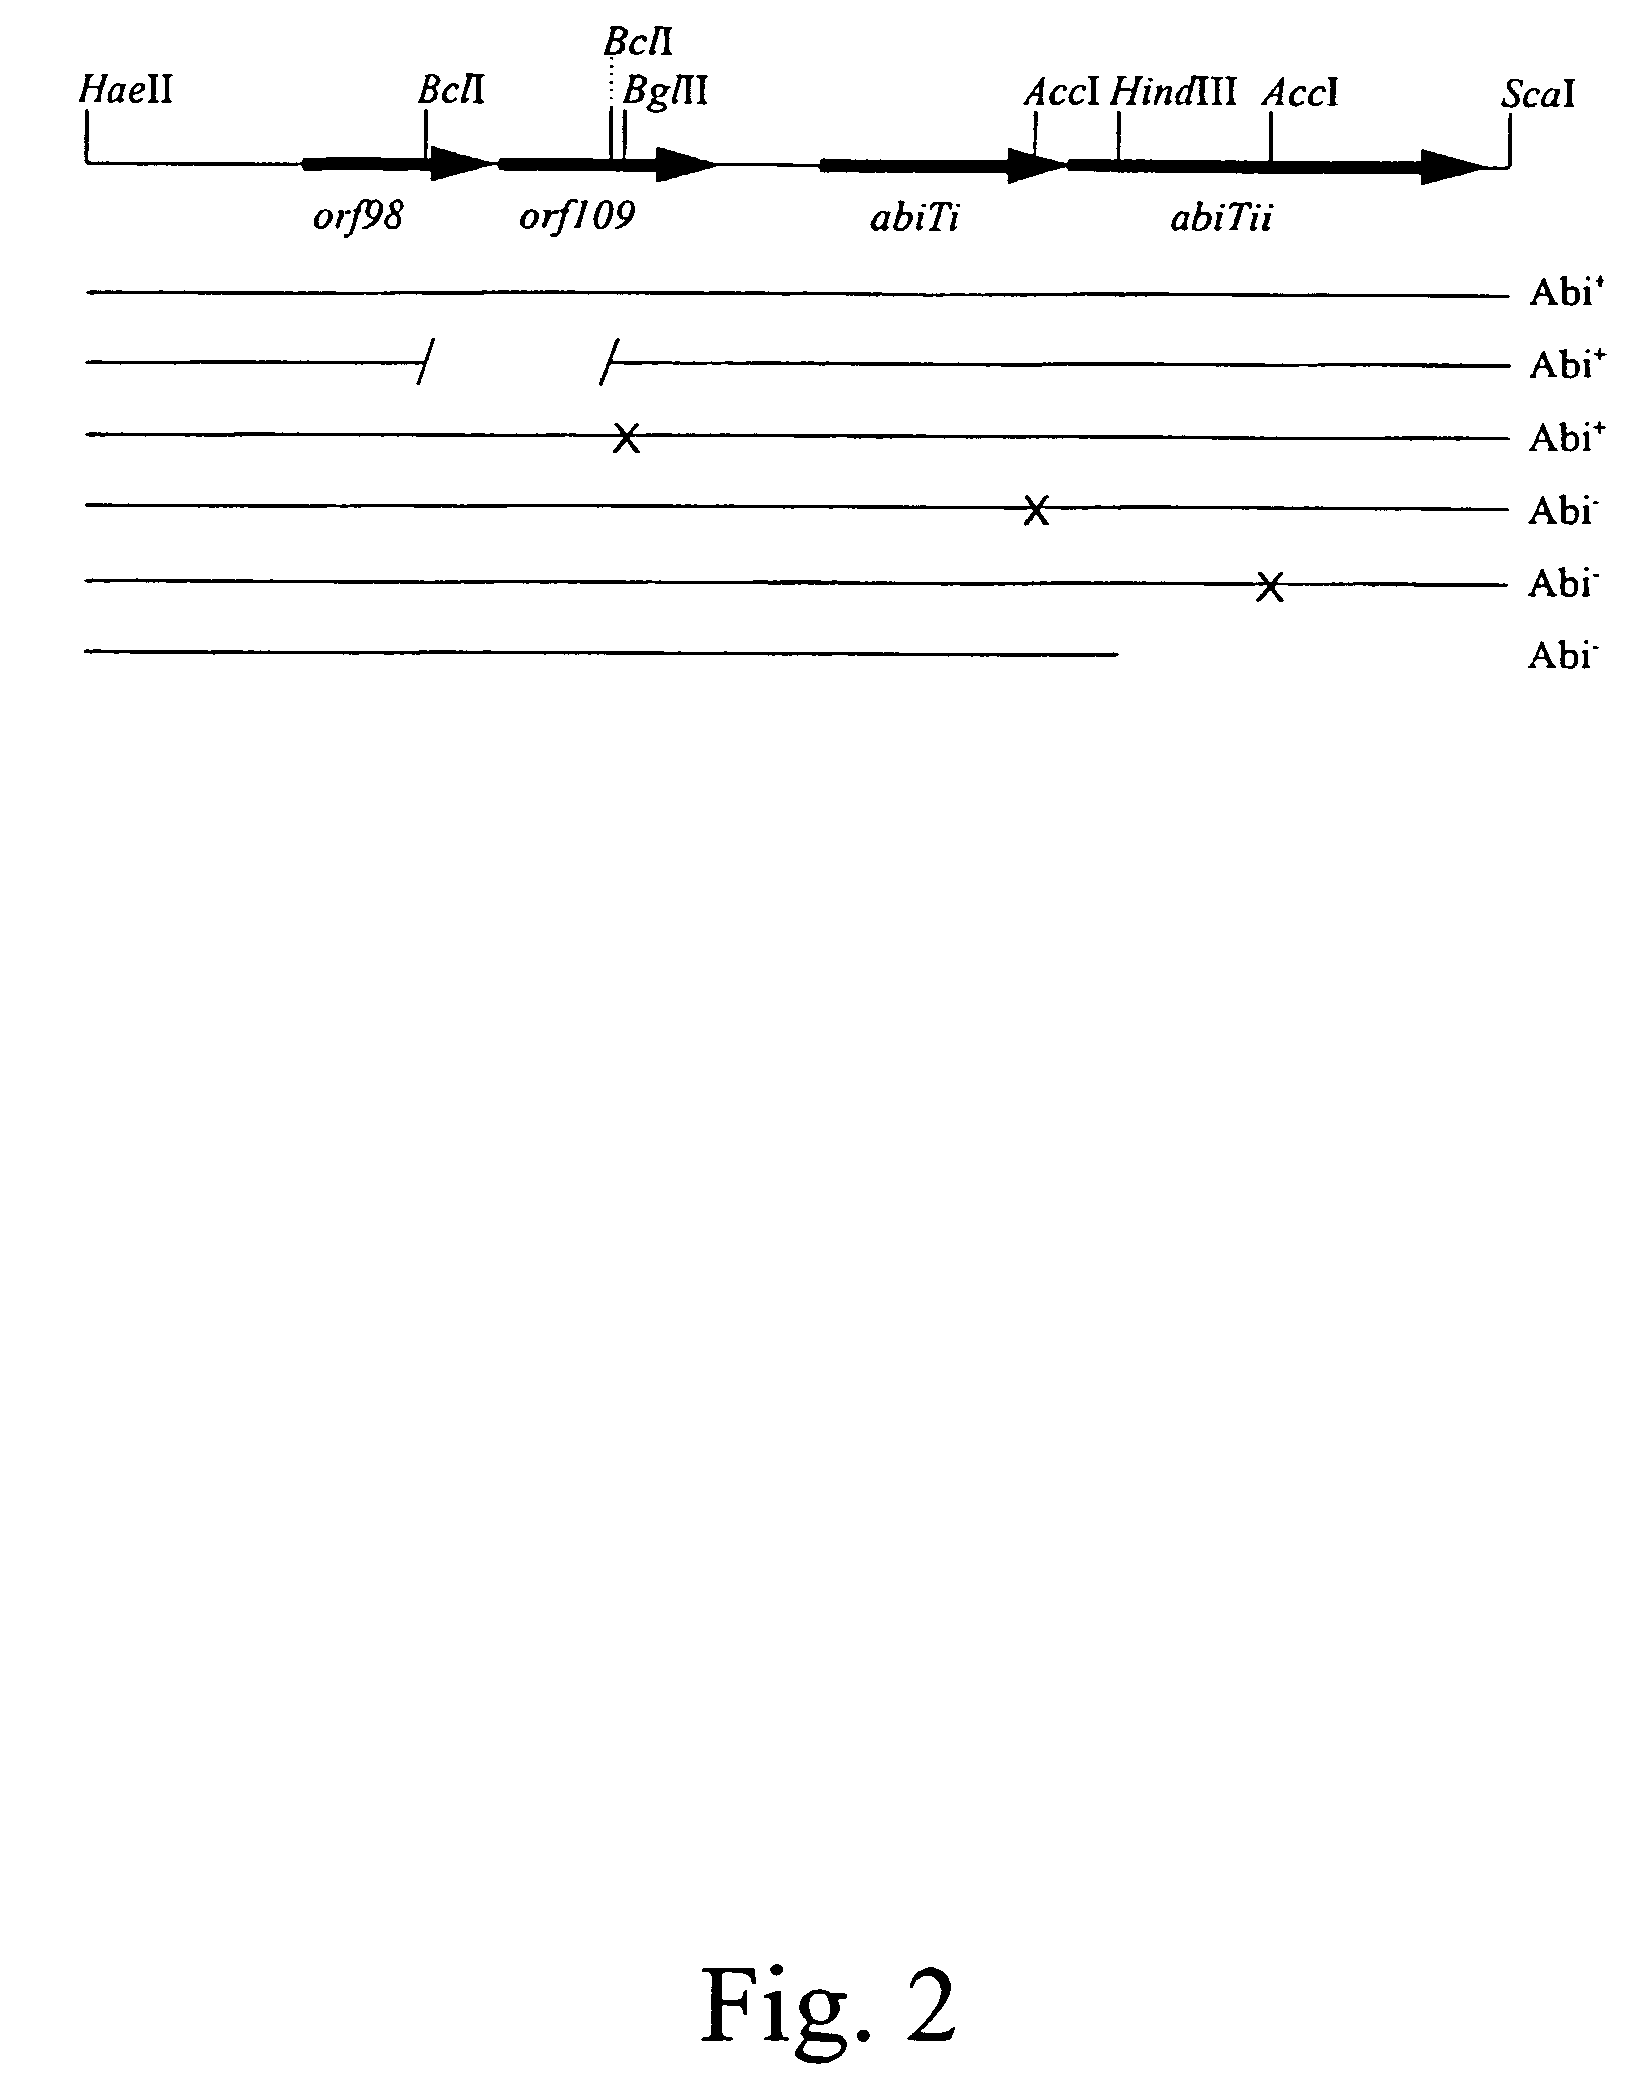 Fragment of L. lactis plasmid conferring antiphage activity and uses thereof